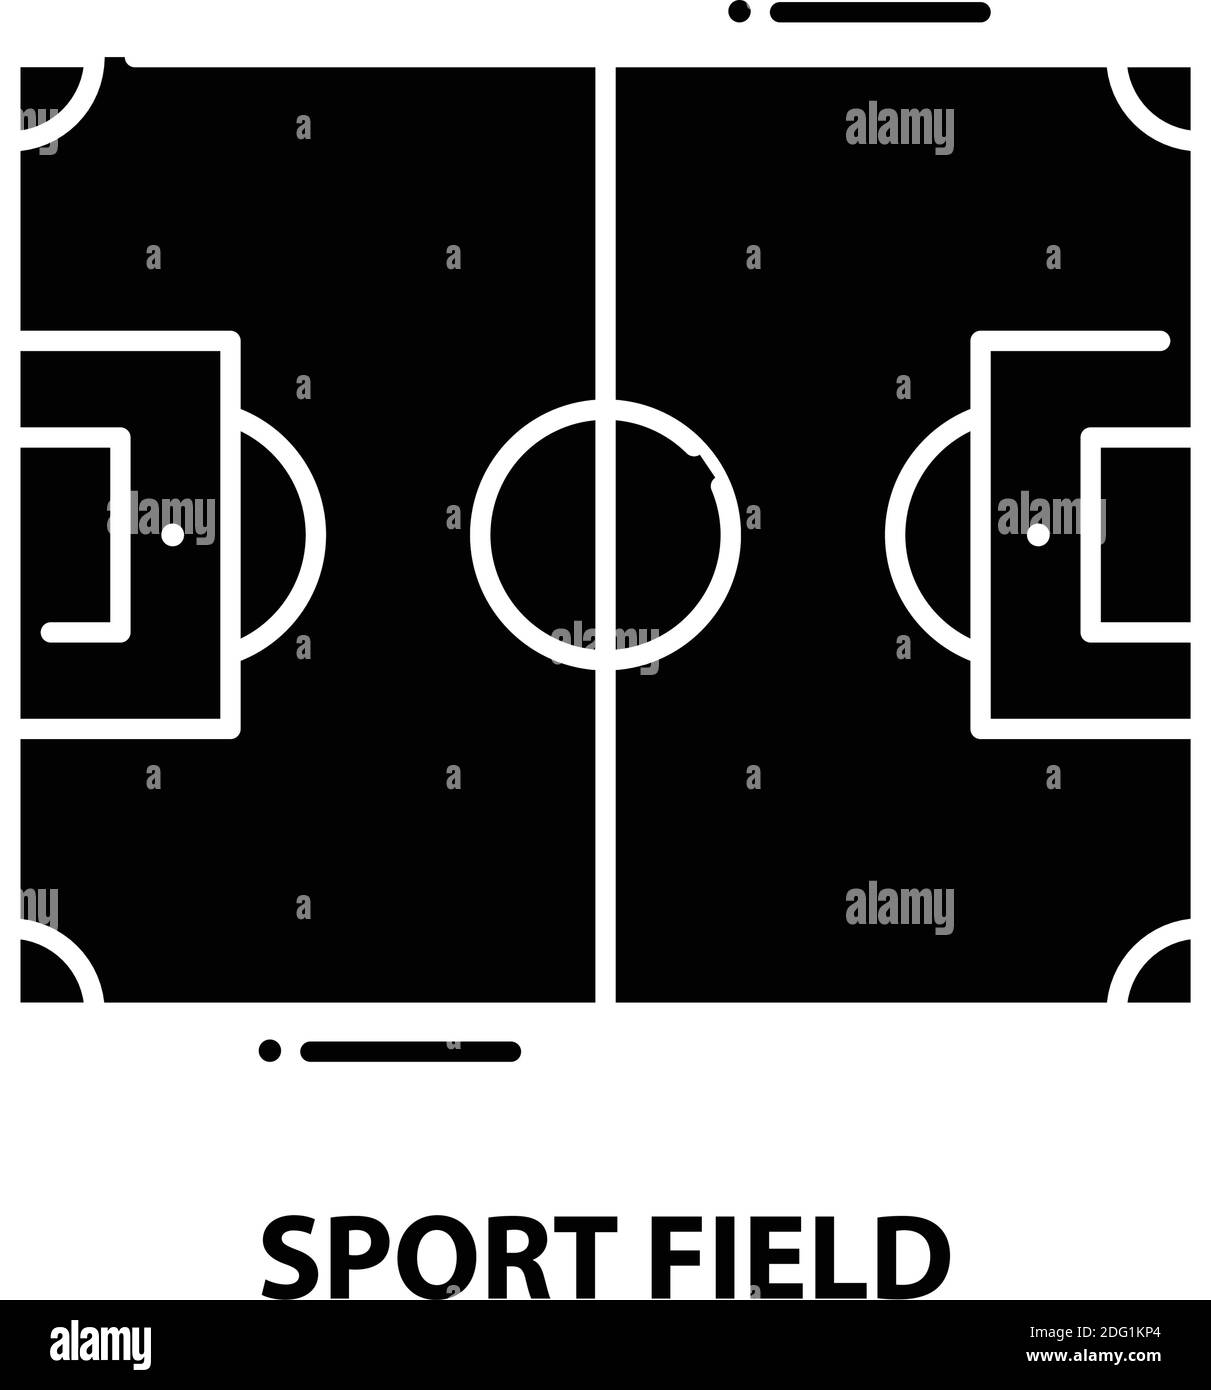 sport field icon, black vector sign with editable strokes, concept illustration Stock Vector